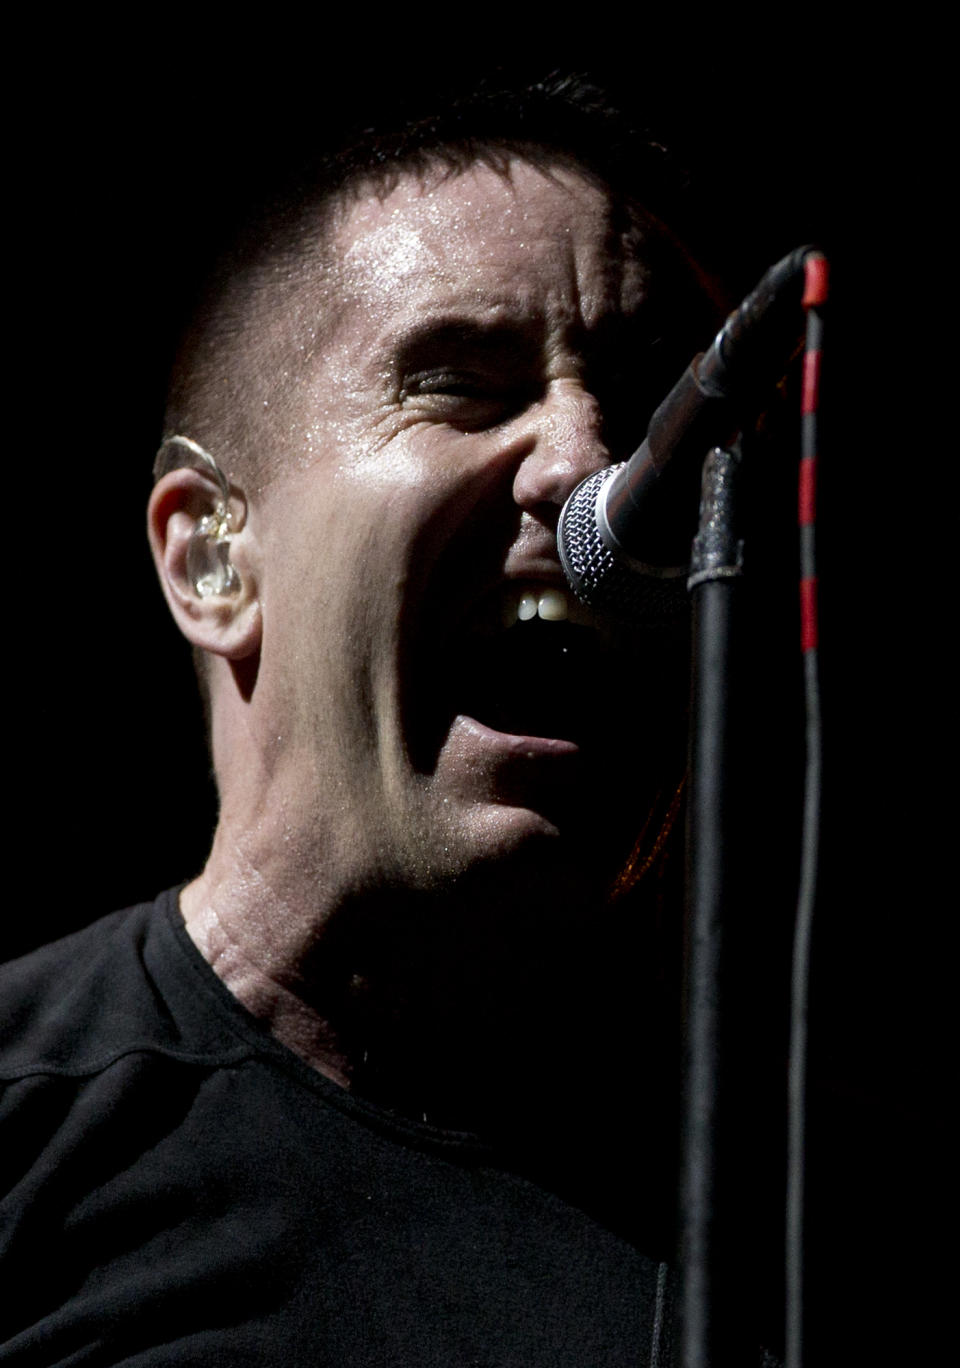 In this March 27, 2014 photo, Trent Reznor of Nine Inch Nails performs at the Vive Latino music festival in Mexico City, Mexico. At first Reznor was hesitant about embarking on tour. “Life feels different at 48 than it did at 24. I don’t know how much longer I’ll be doing this, or people will care ... it’s not as endless as it once seemed, so I treat it more preciously.” (AP Photo/Rebecca Blackwell)